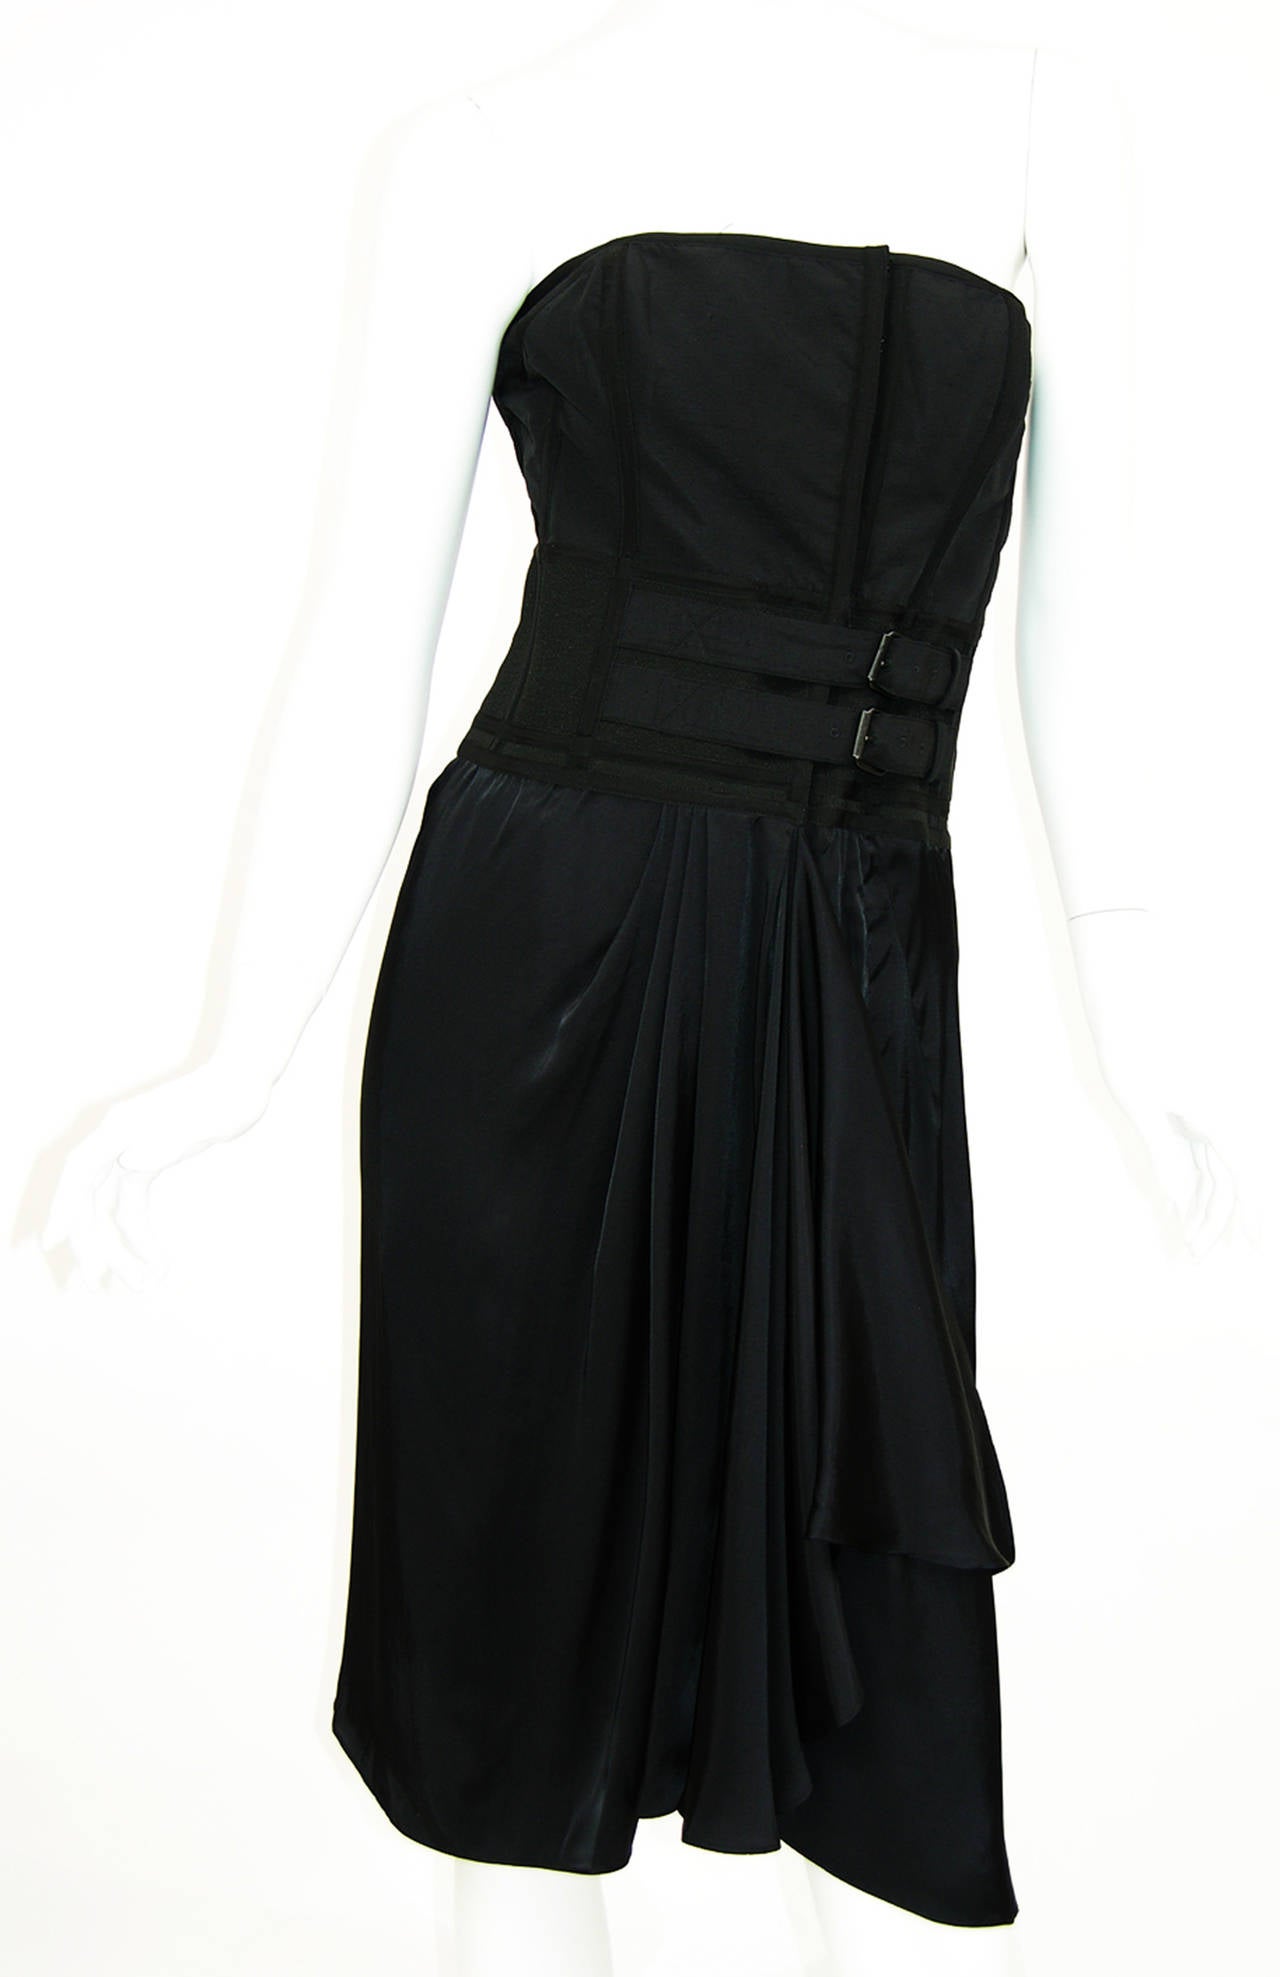 NEW BALENCIAGA BLACK CORSET DRESS

FRENCH SIZE 42 - US 8/10

MEASUREMENTS: LENGTH - 33 INCHES, BUST - 17